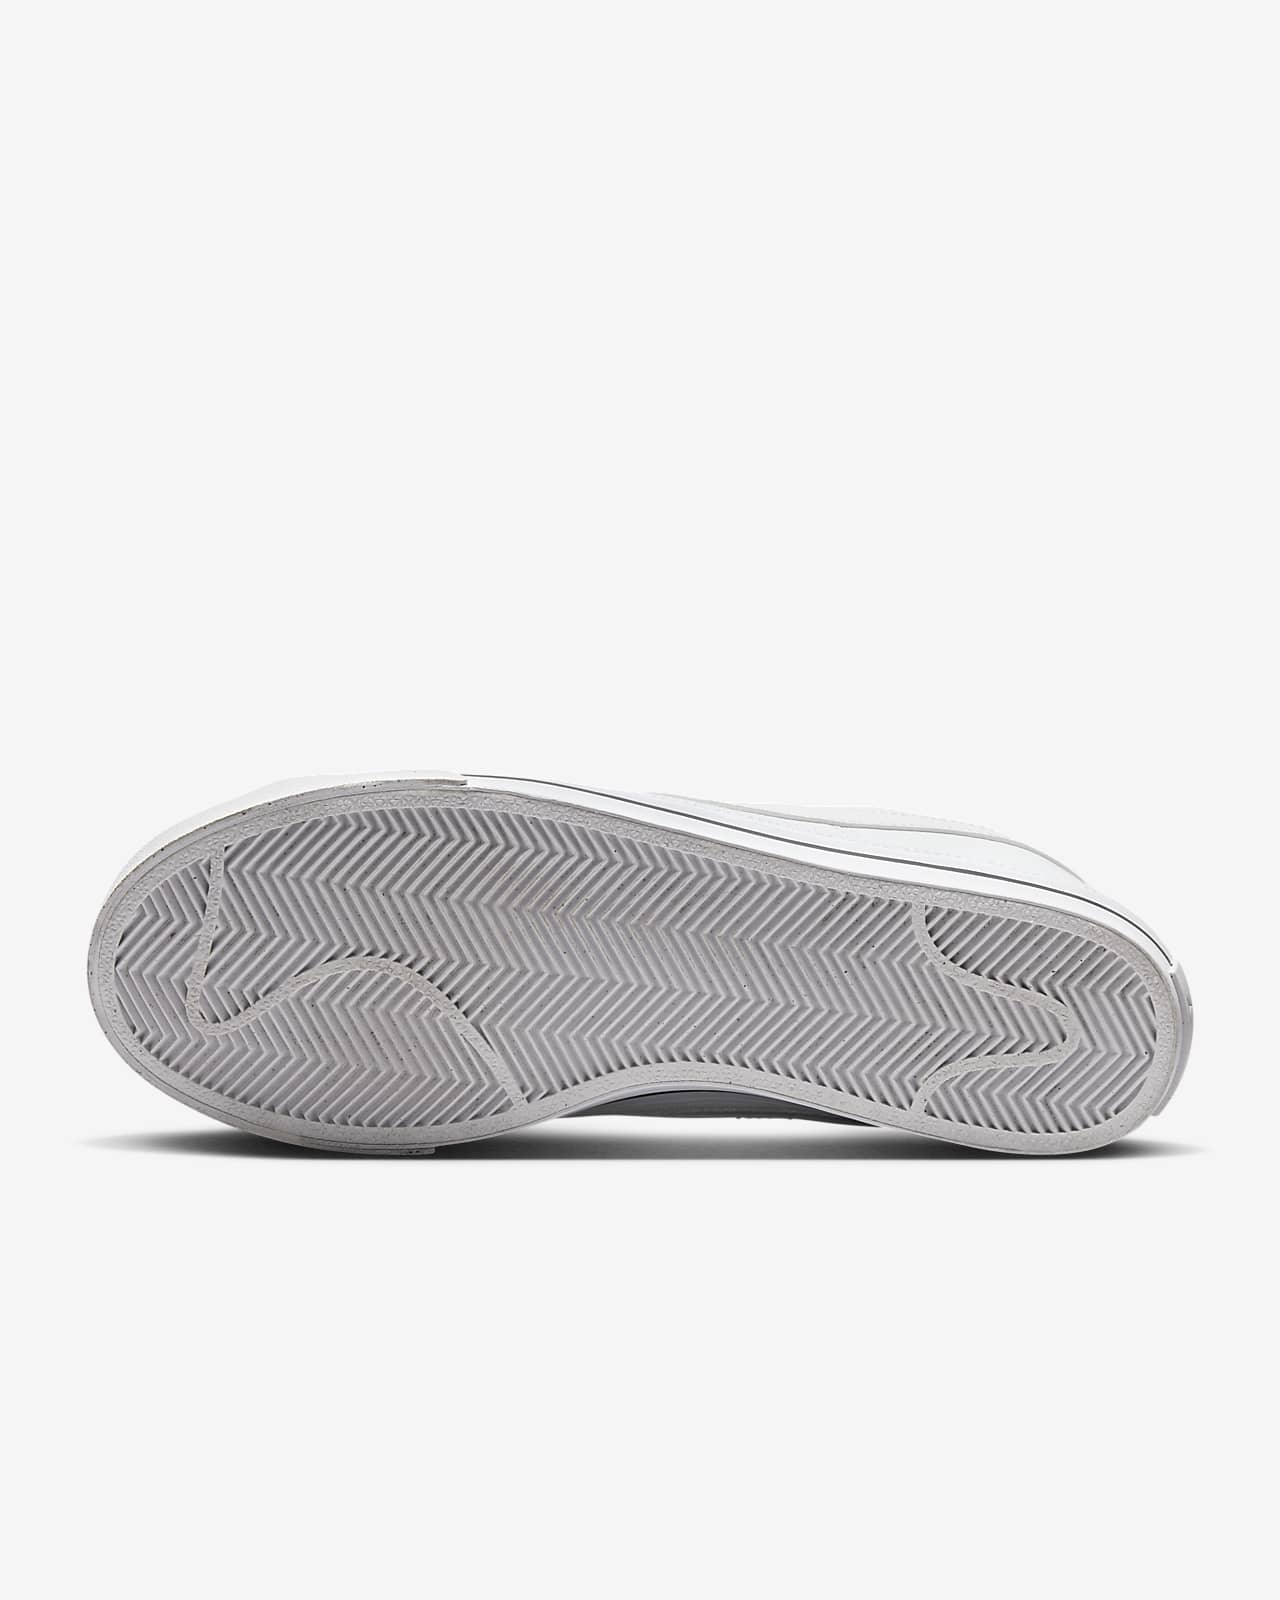 Nike Women's Court Legacy Next Nature Shoes